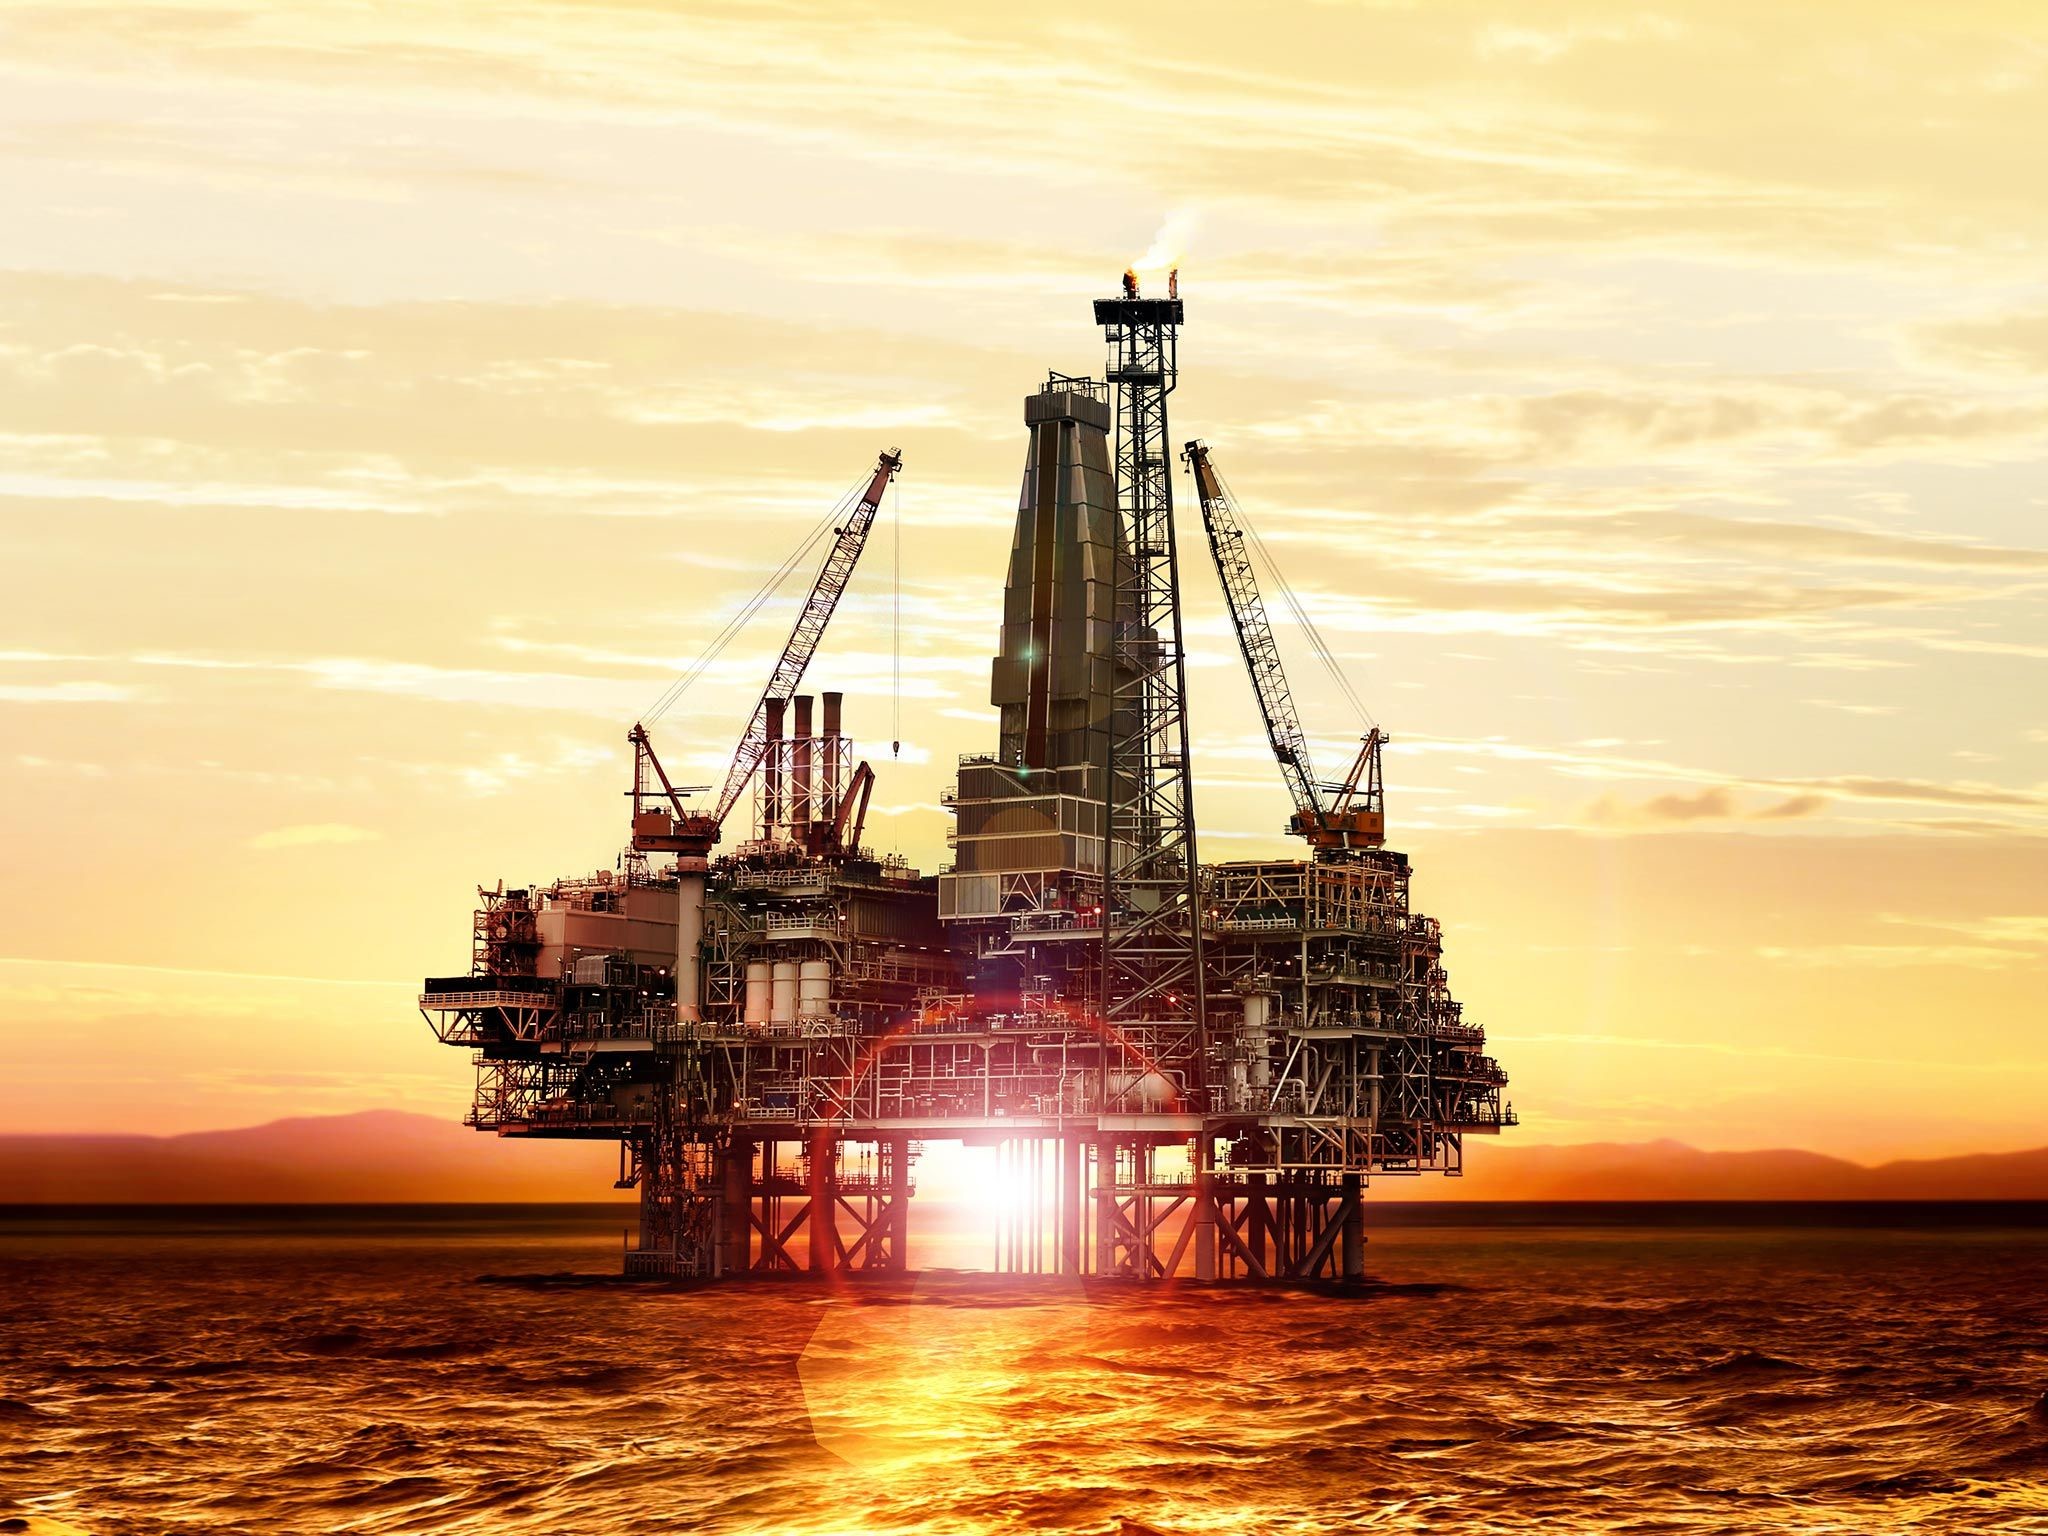 oil rig wallpaper, oil rig, offshore drilling, vehicle, semi submersible, jackup rig